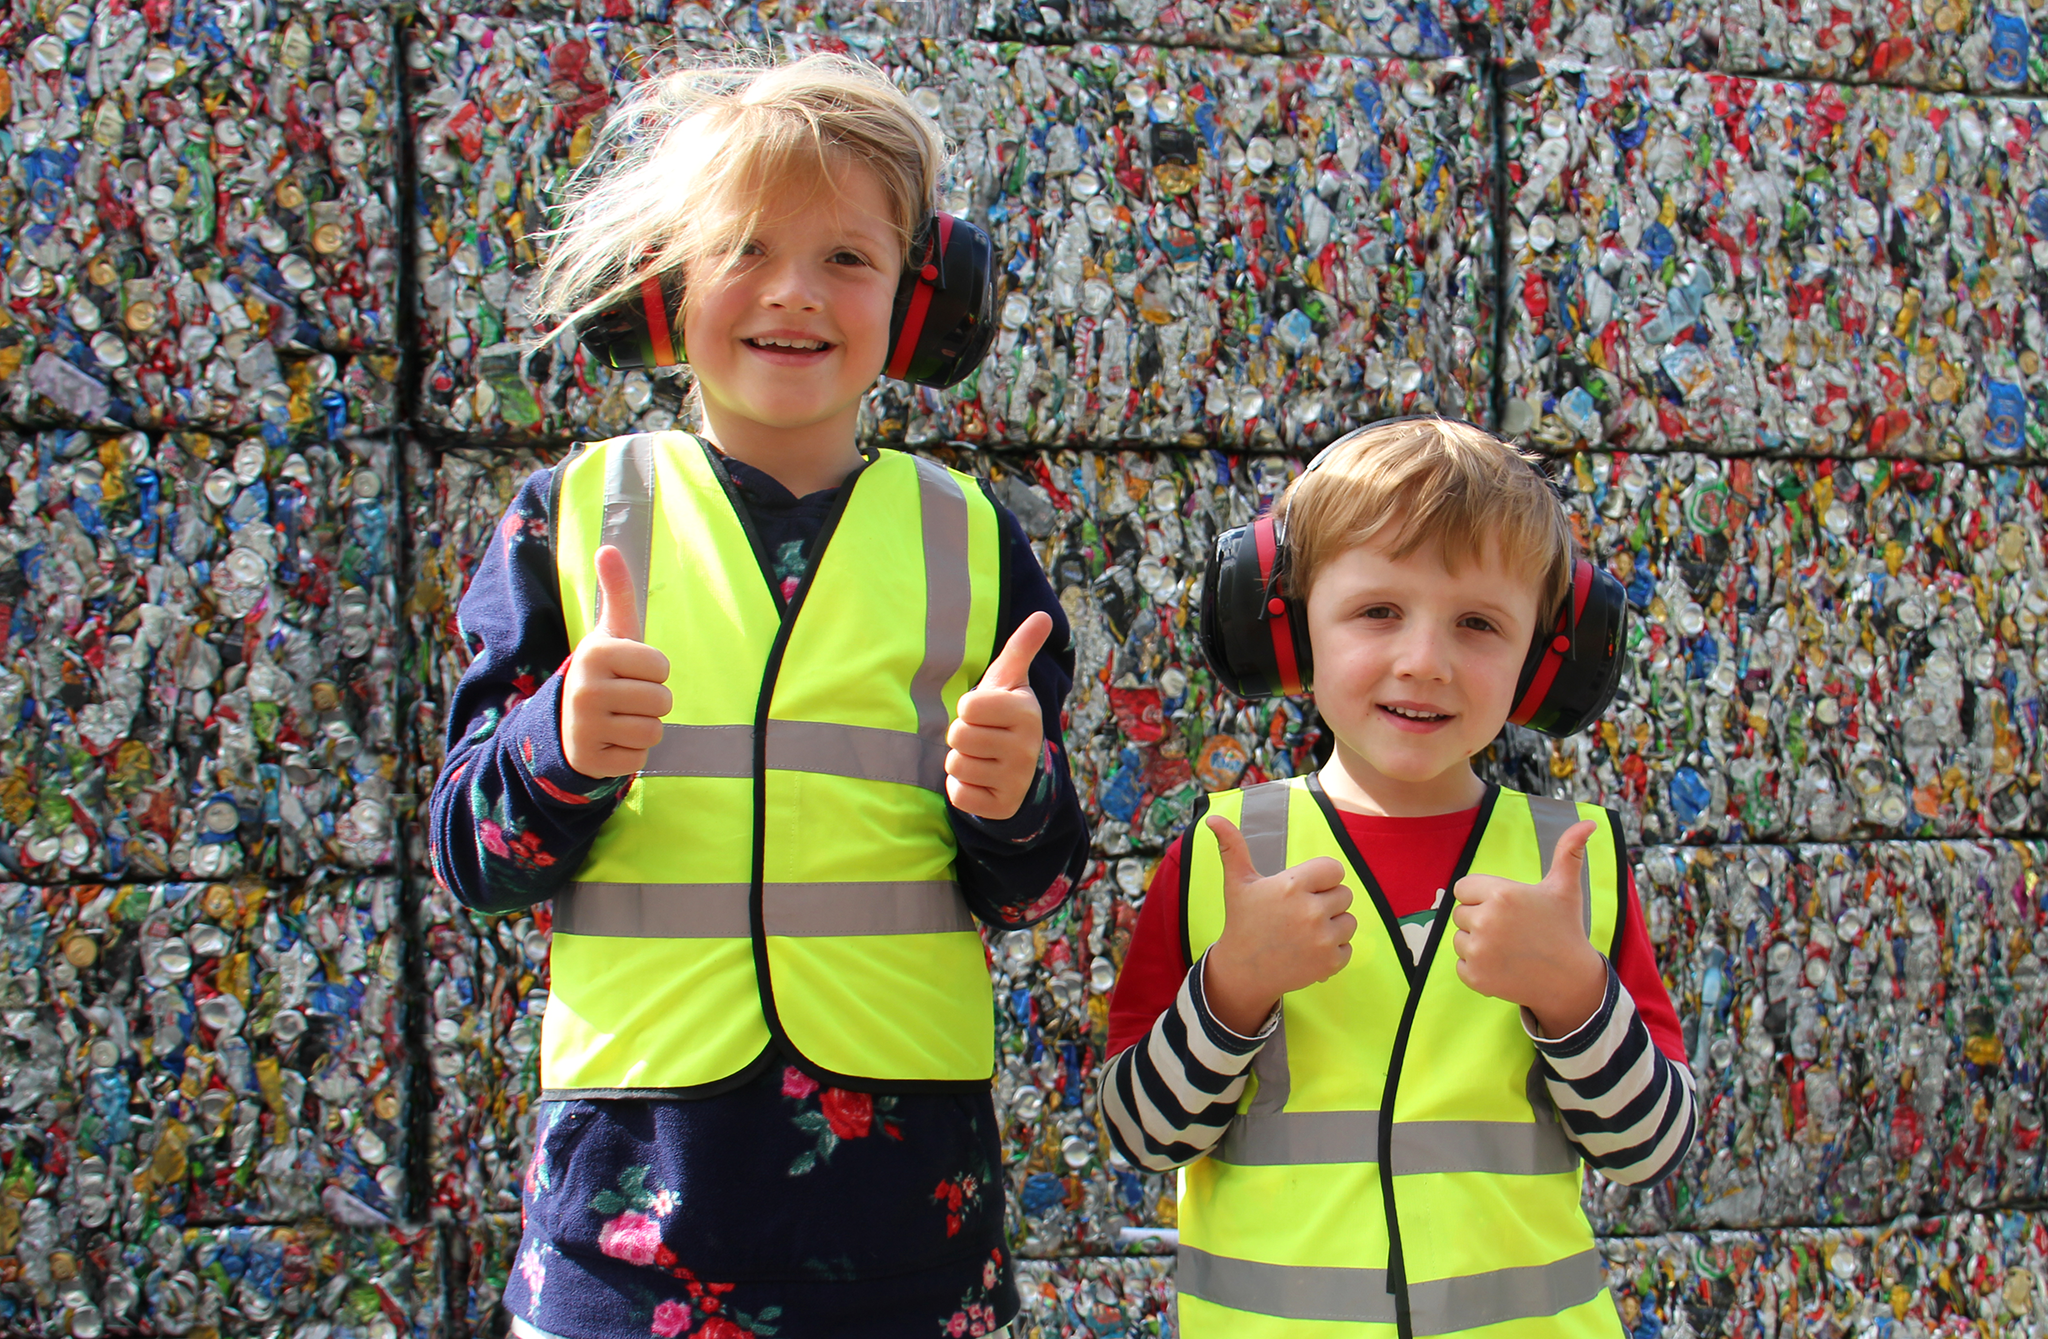 Two small children in hi-viz vests and ear defenders standing in front of bales of compacted cans and giving thumbs up